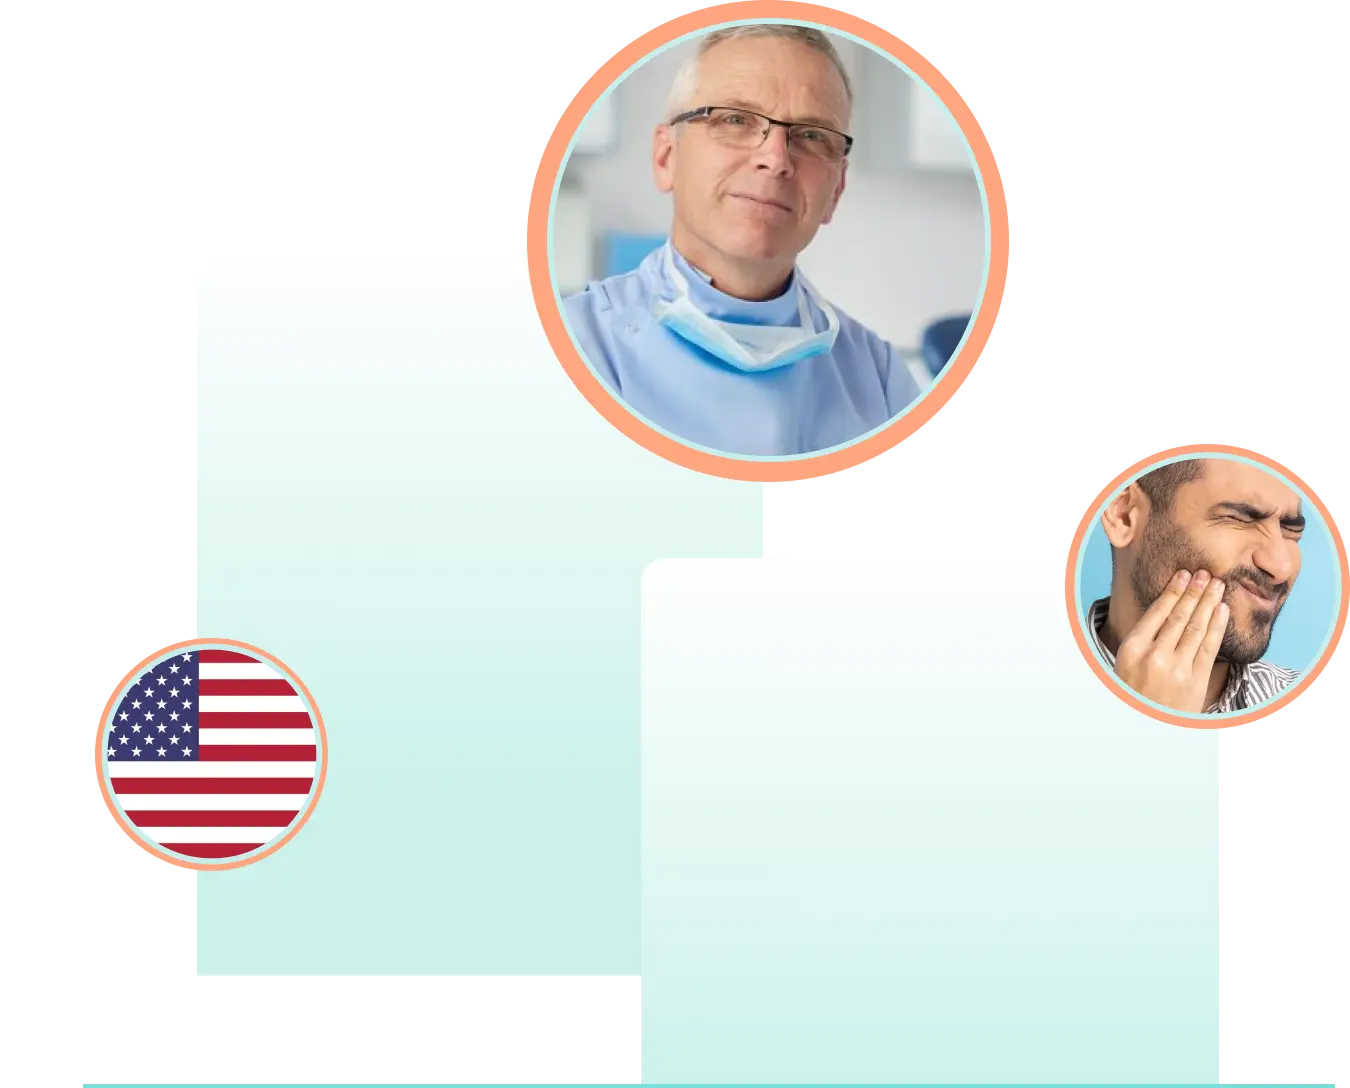 70% of U.S. adults 30+ say their dental/oral health is excellent/good and American flag and Dentists and hygienists say that only 47% of their adult patients have excellent or good oral health on average